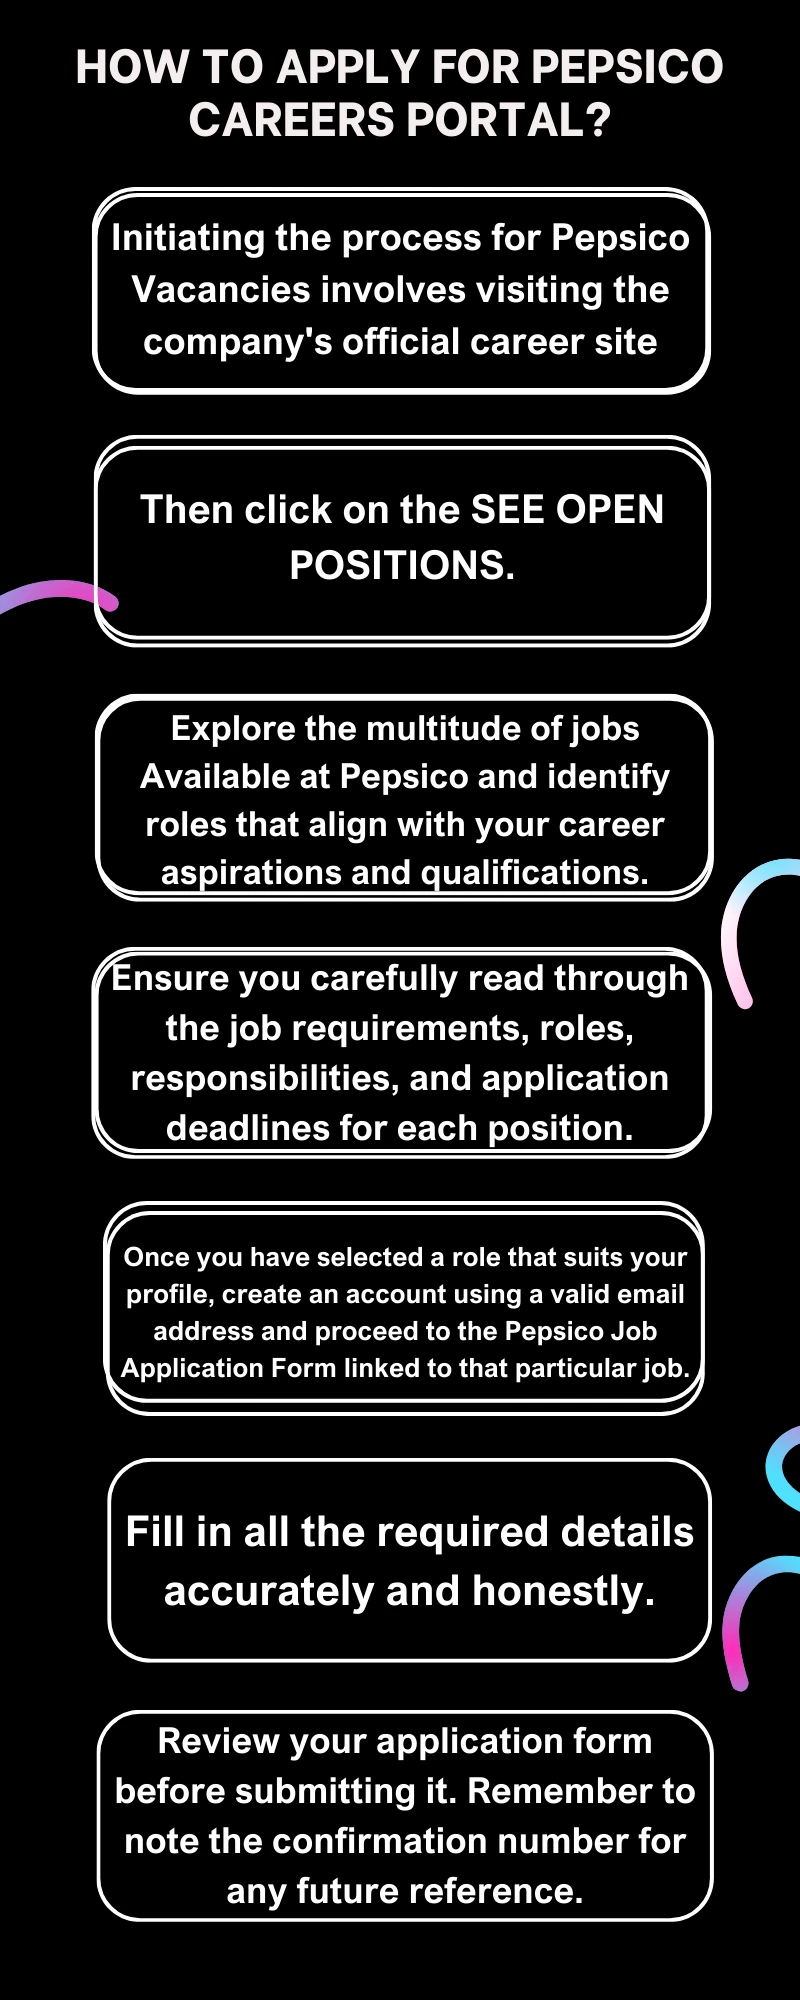 How To Apply for PepsiCo Careers Portal?